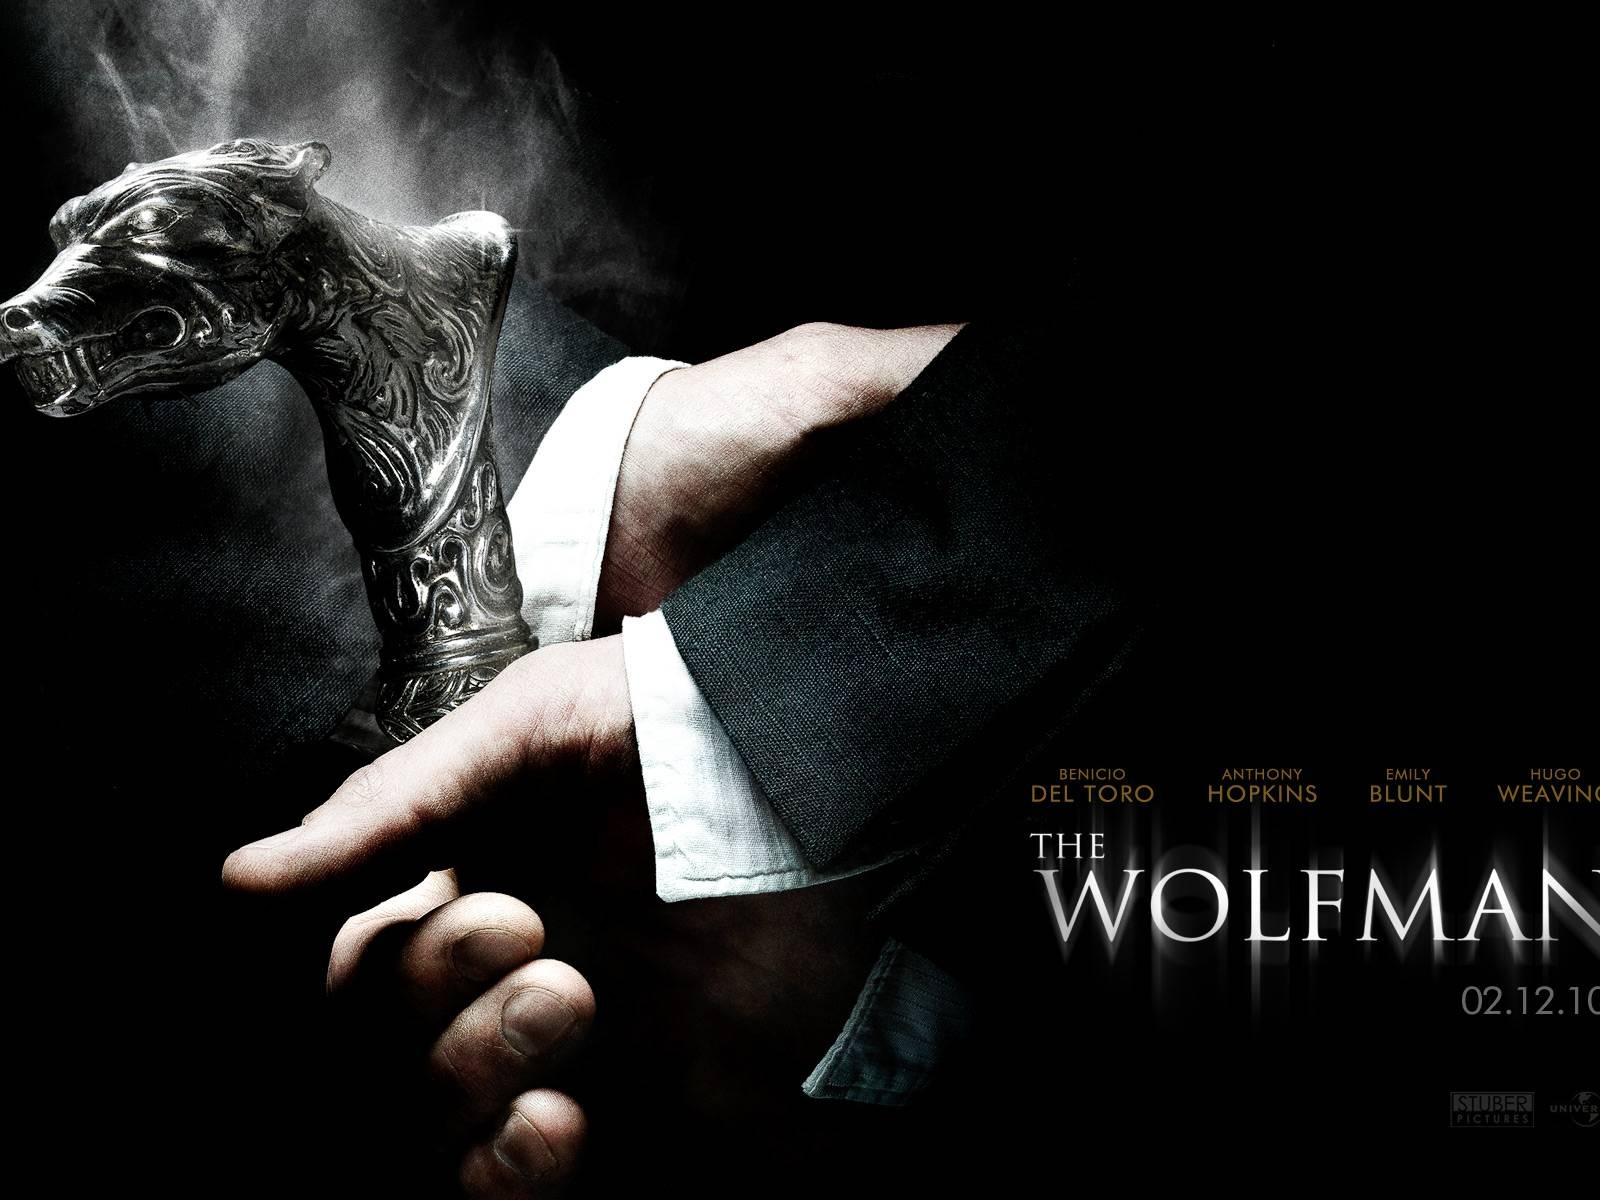 The Wolfman Movie Wallpapers #7 - 1600x1200